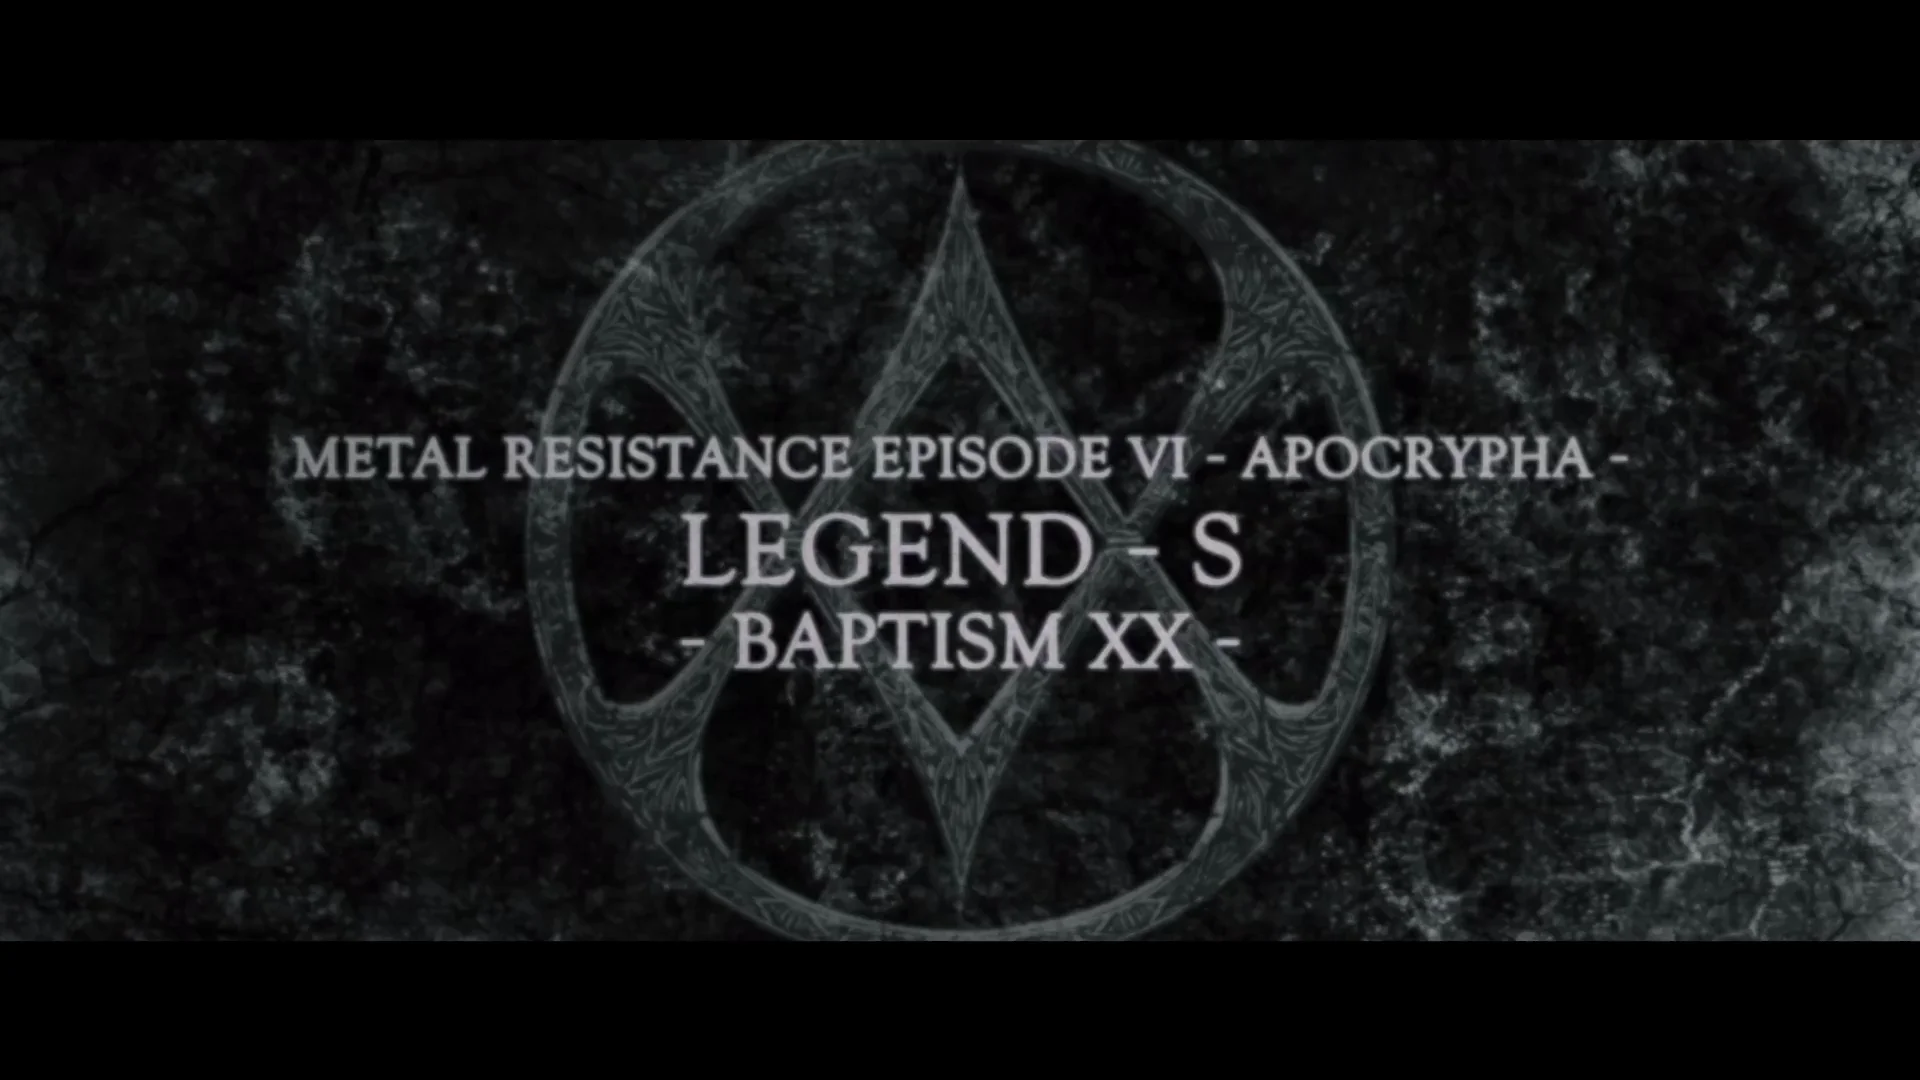 [Blu ray rip] BABYMETAL - LEGEND - S - BAPTISM XX - IN THE NAME OF